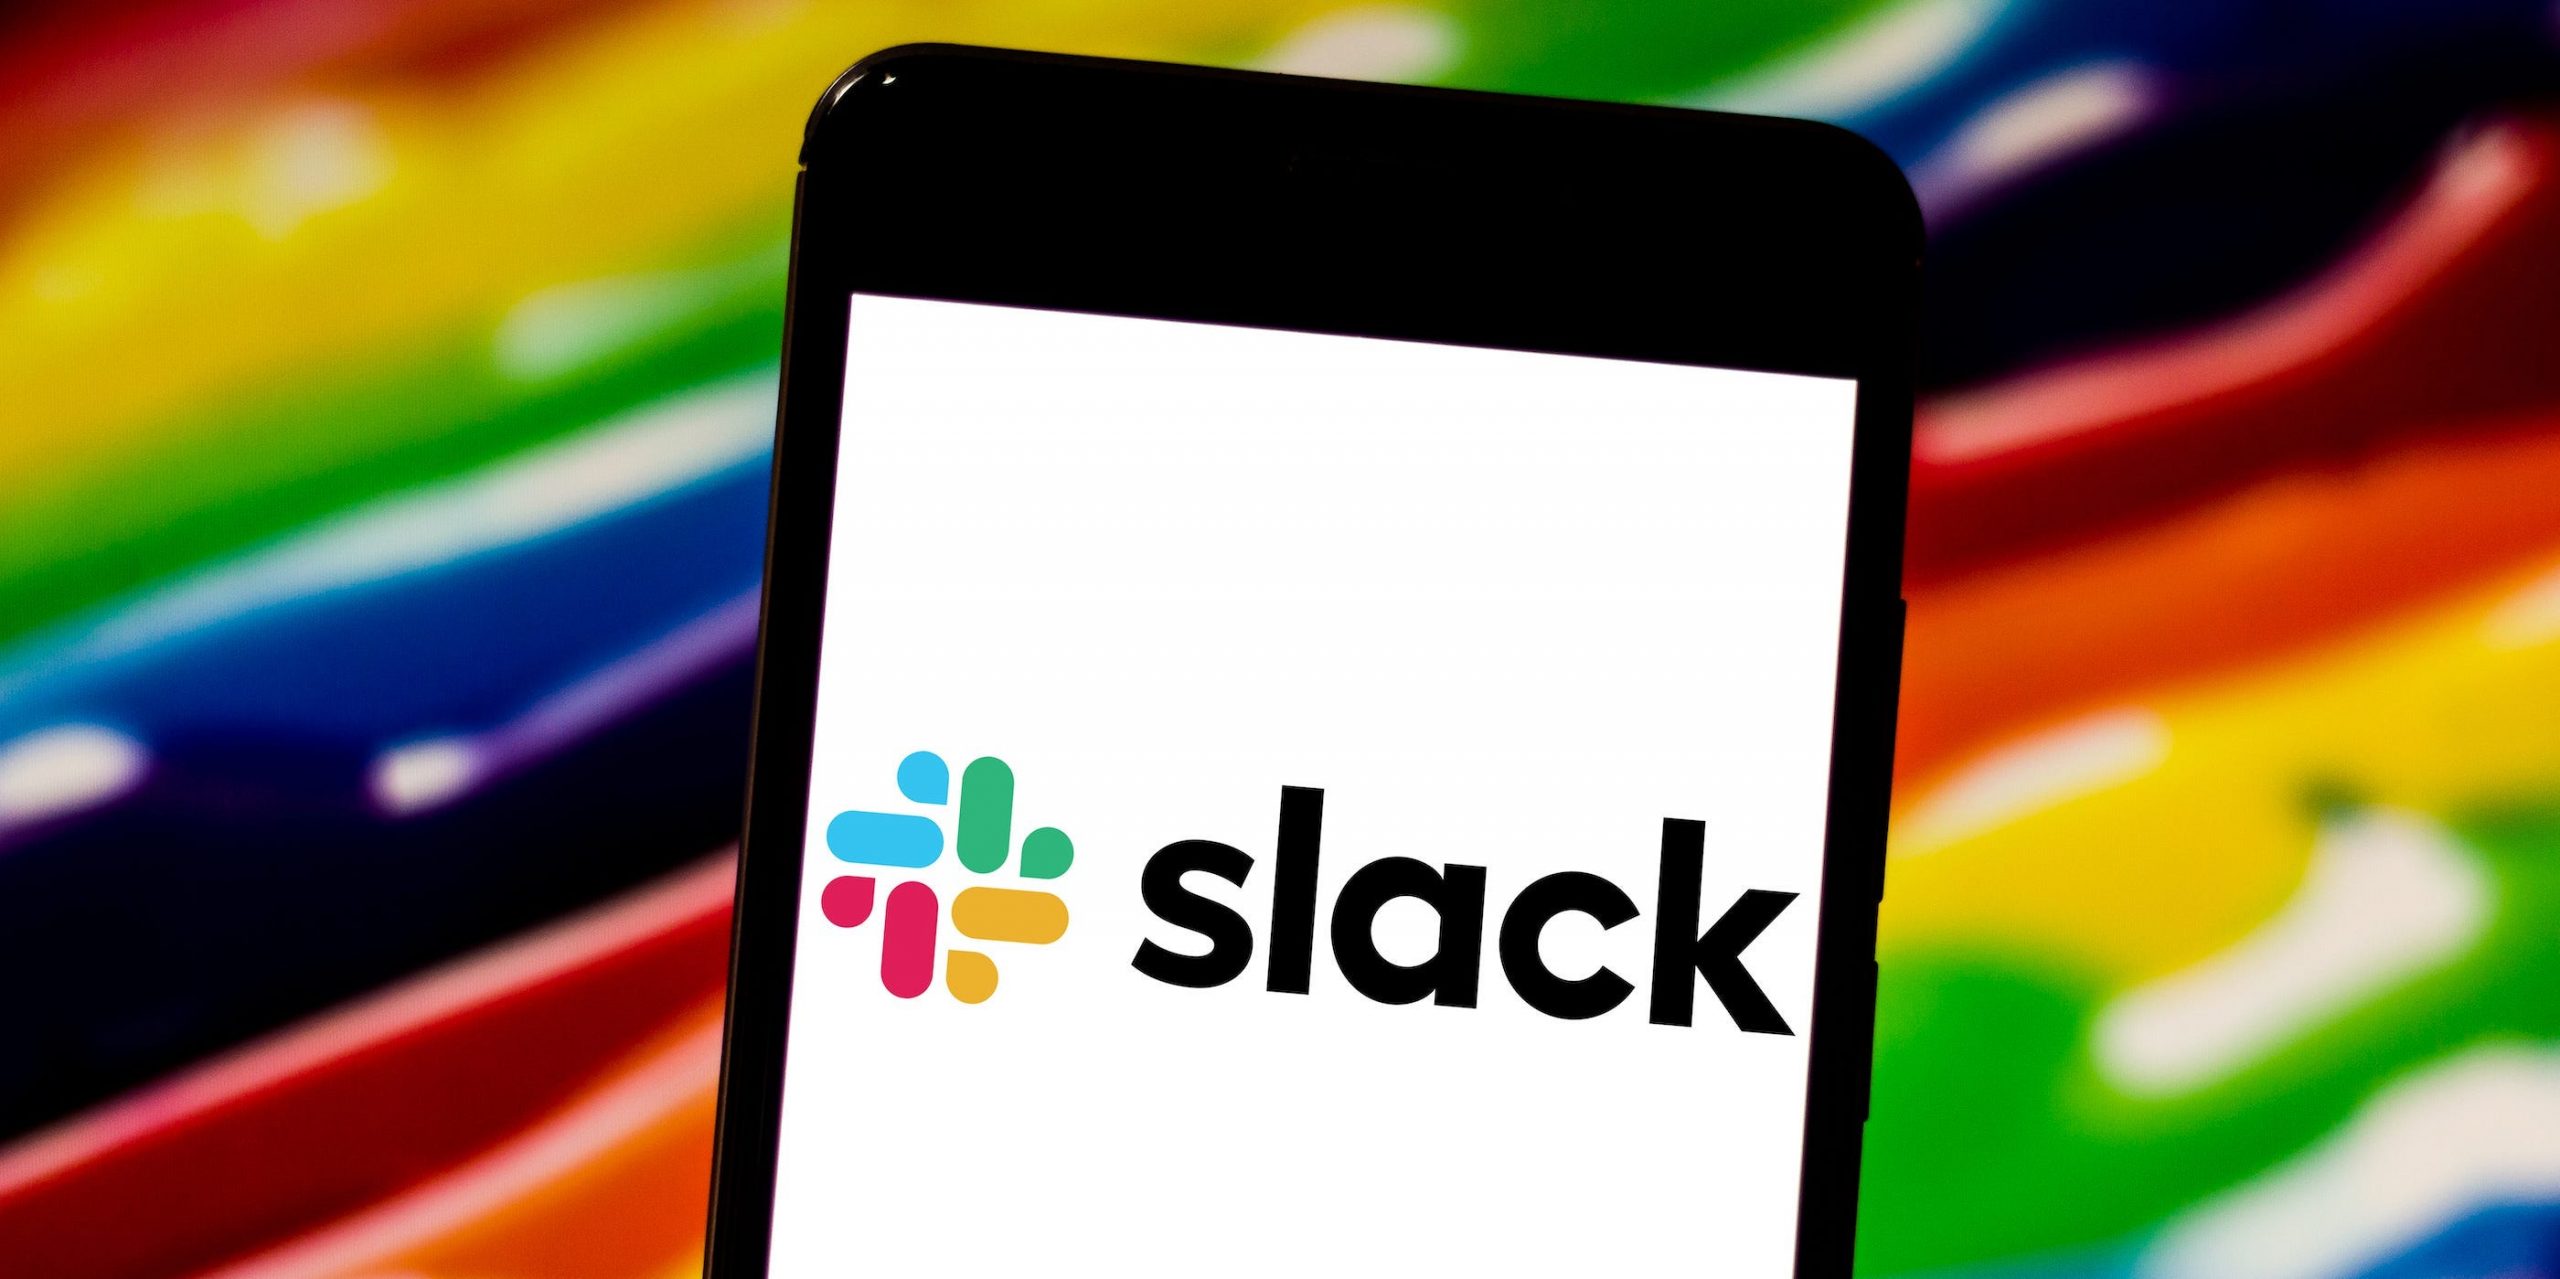 The Slack logo displayed on a phone, in front of a colorful background.